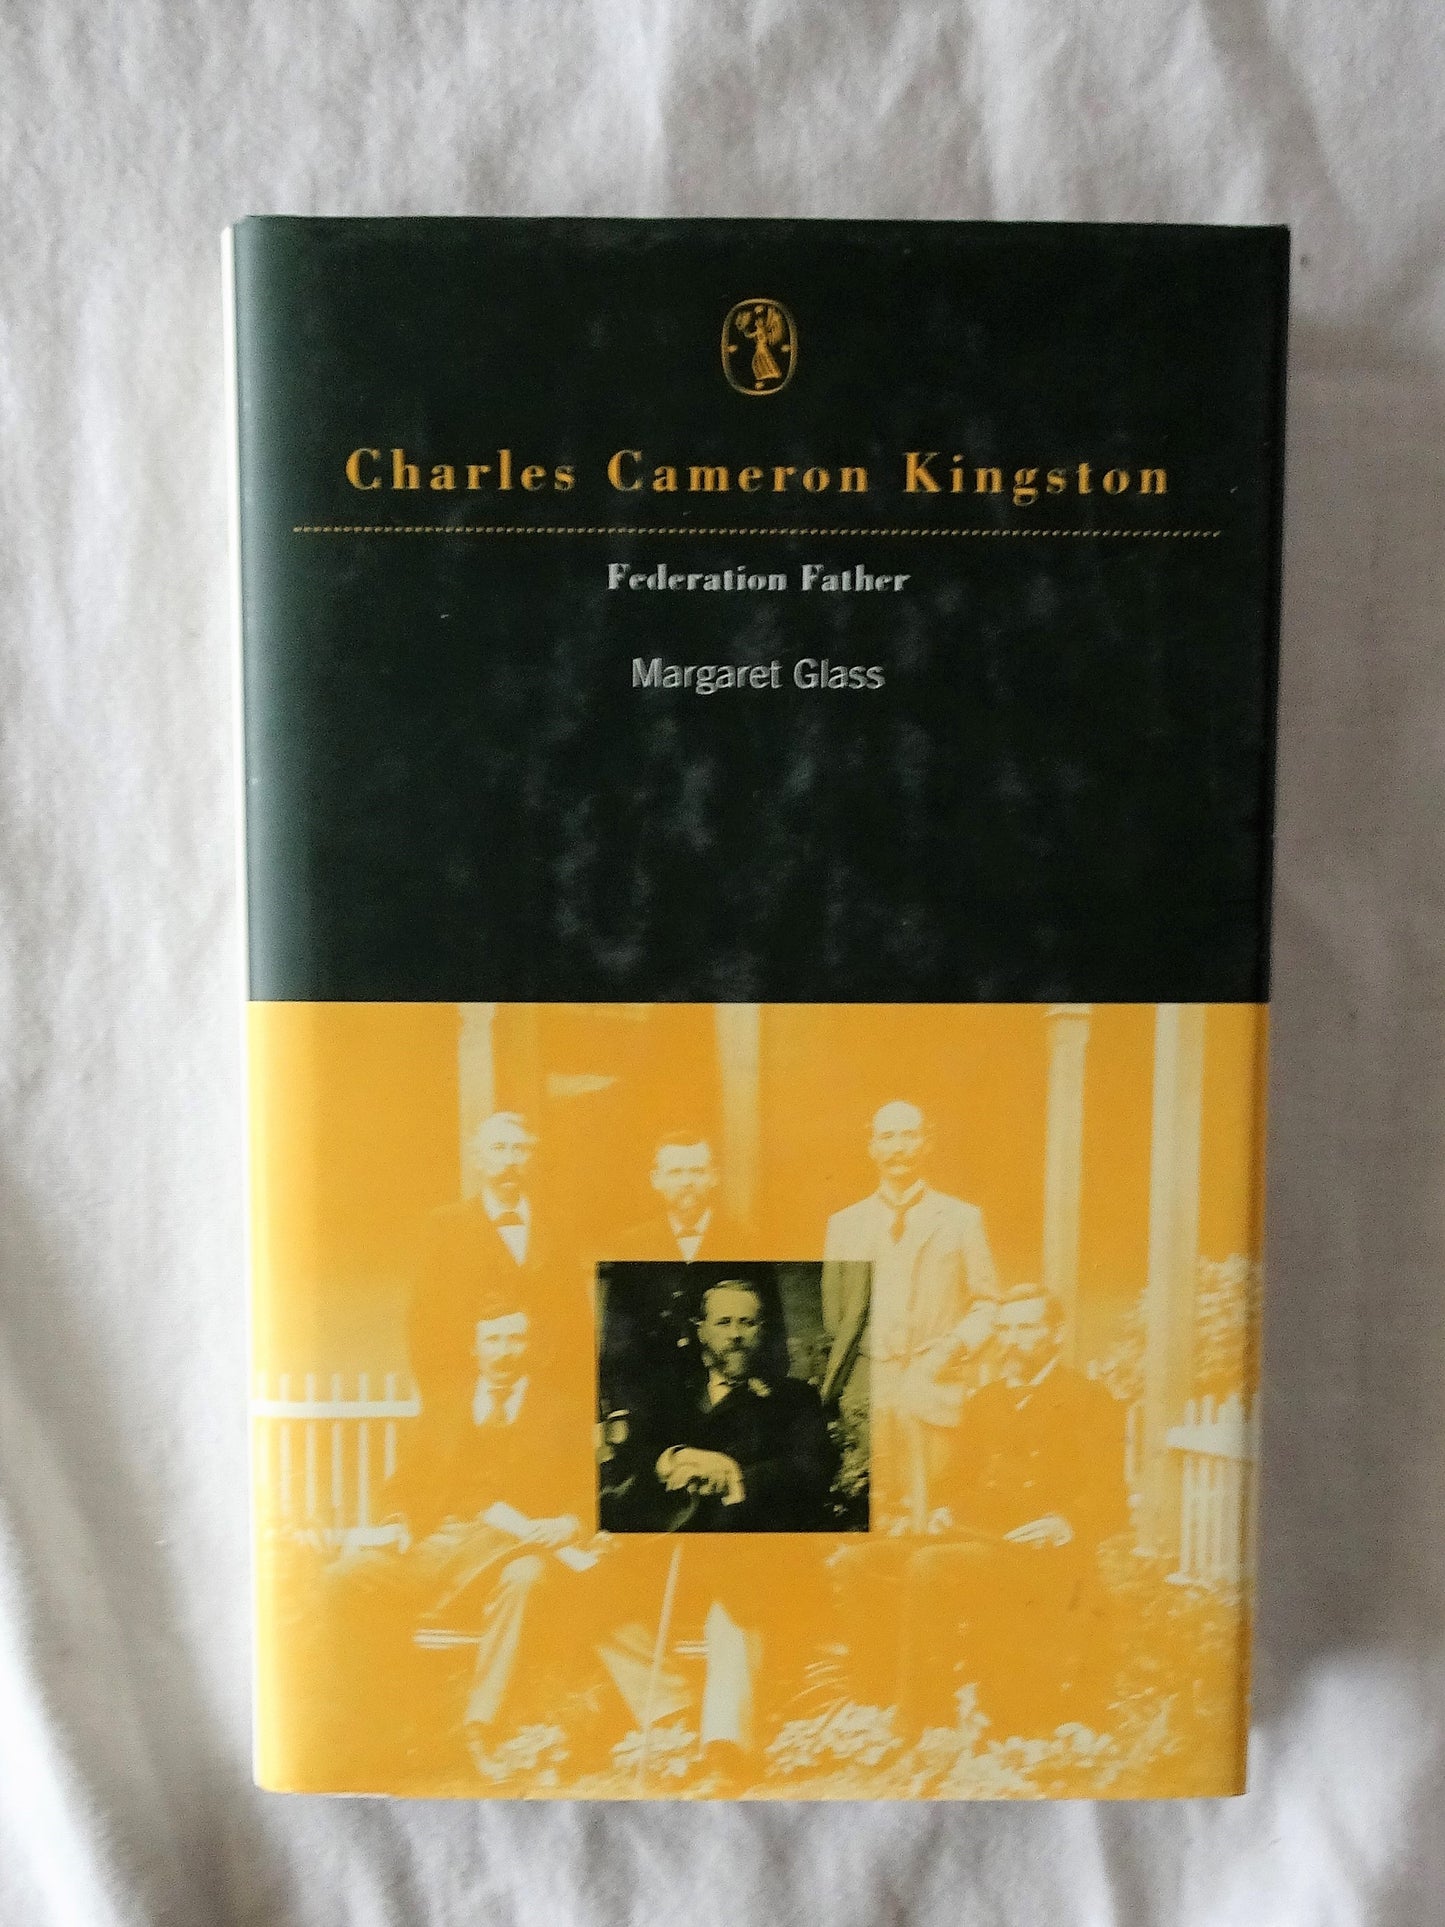 Charles Cameron Kingston by Margaret Glass